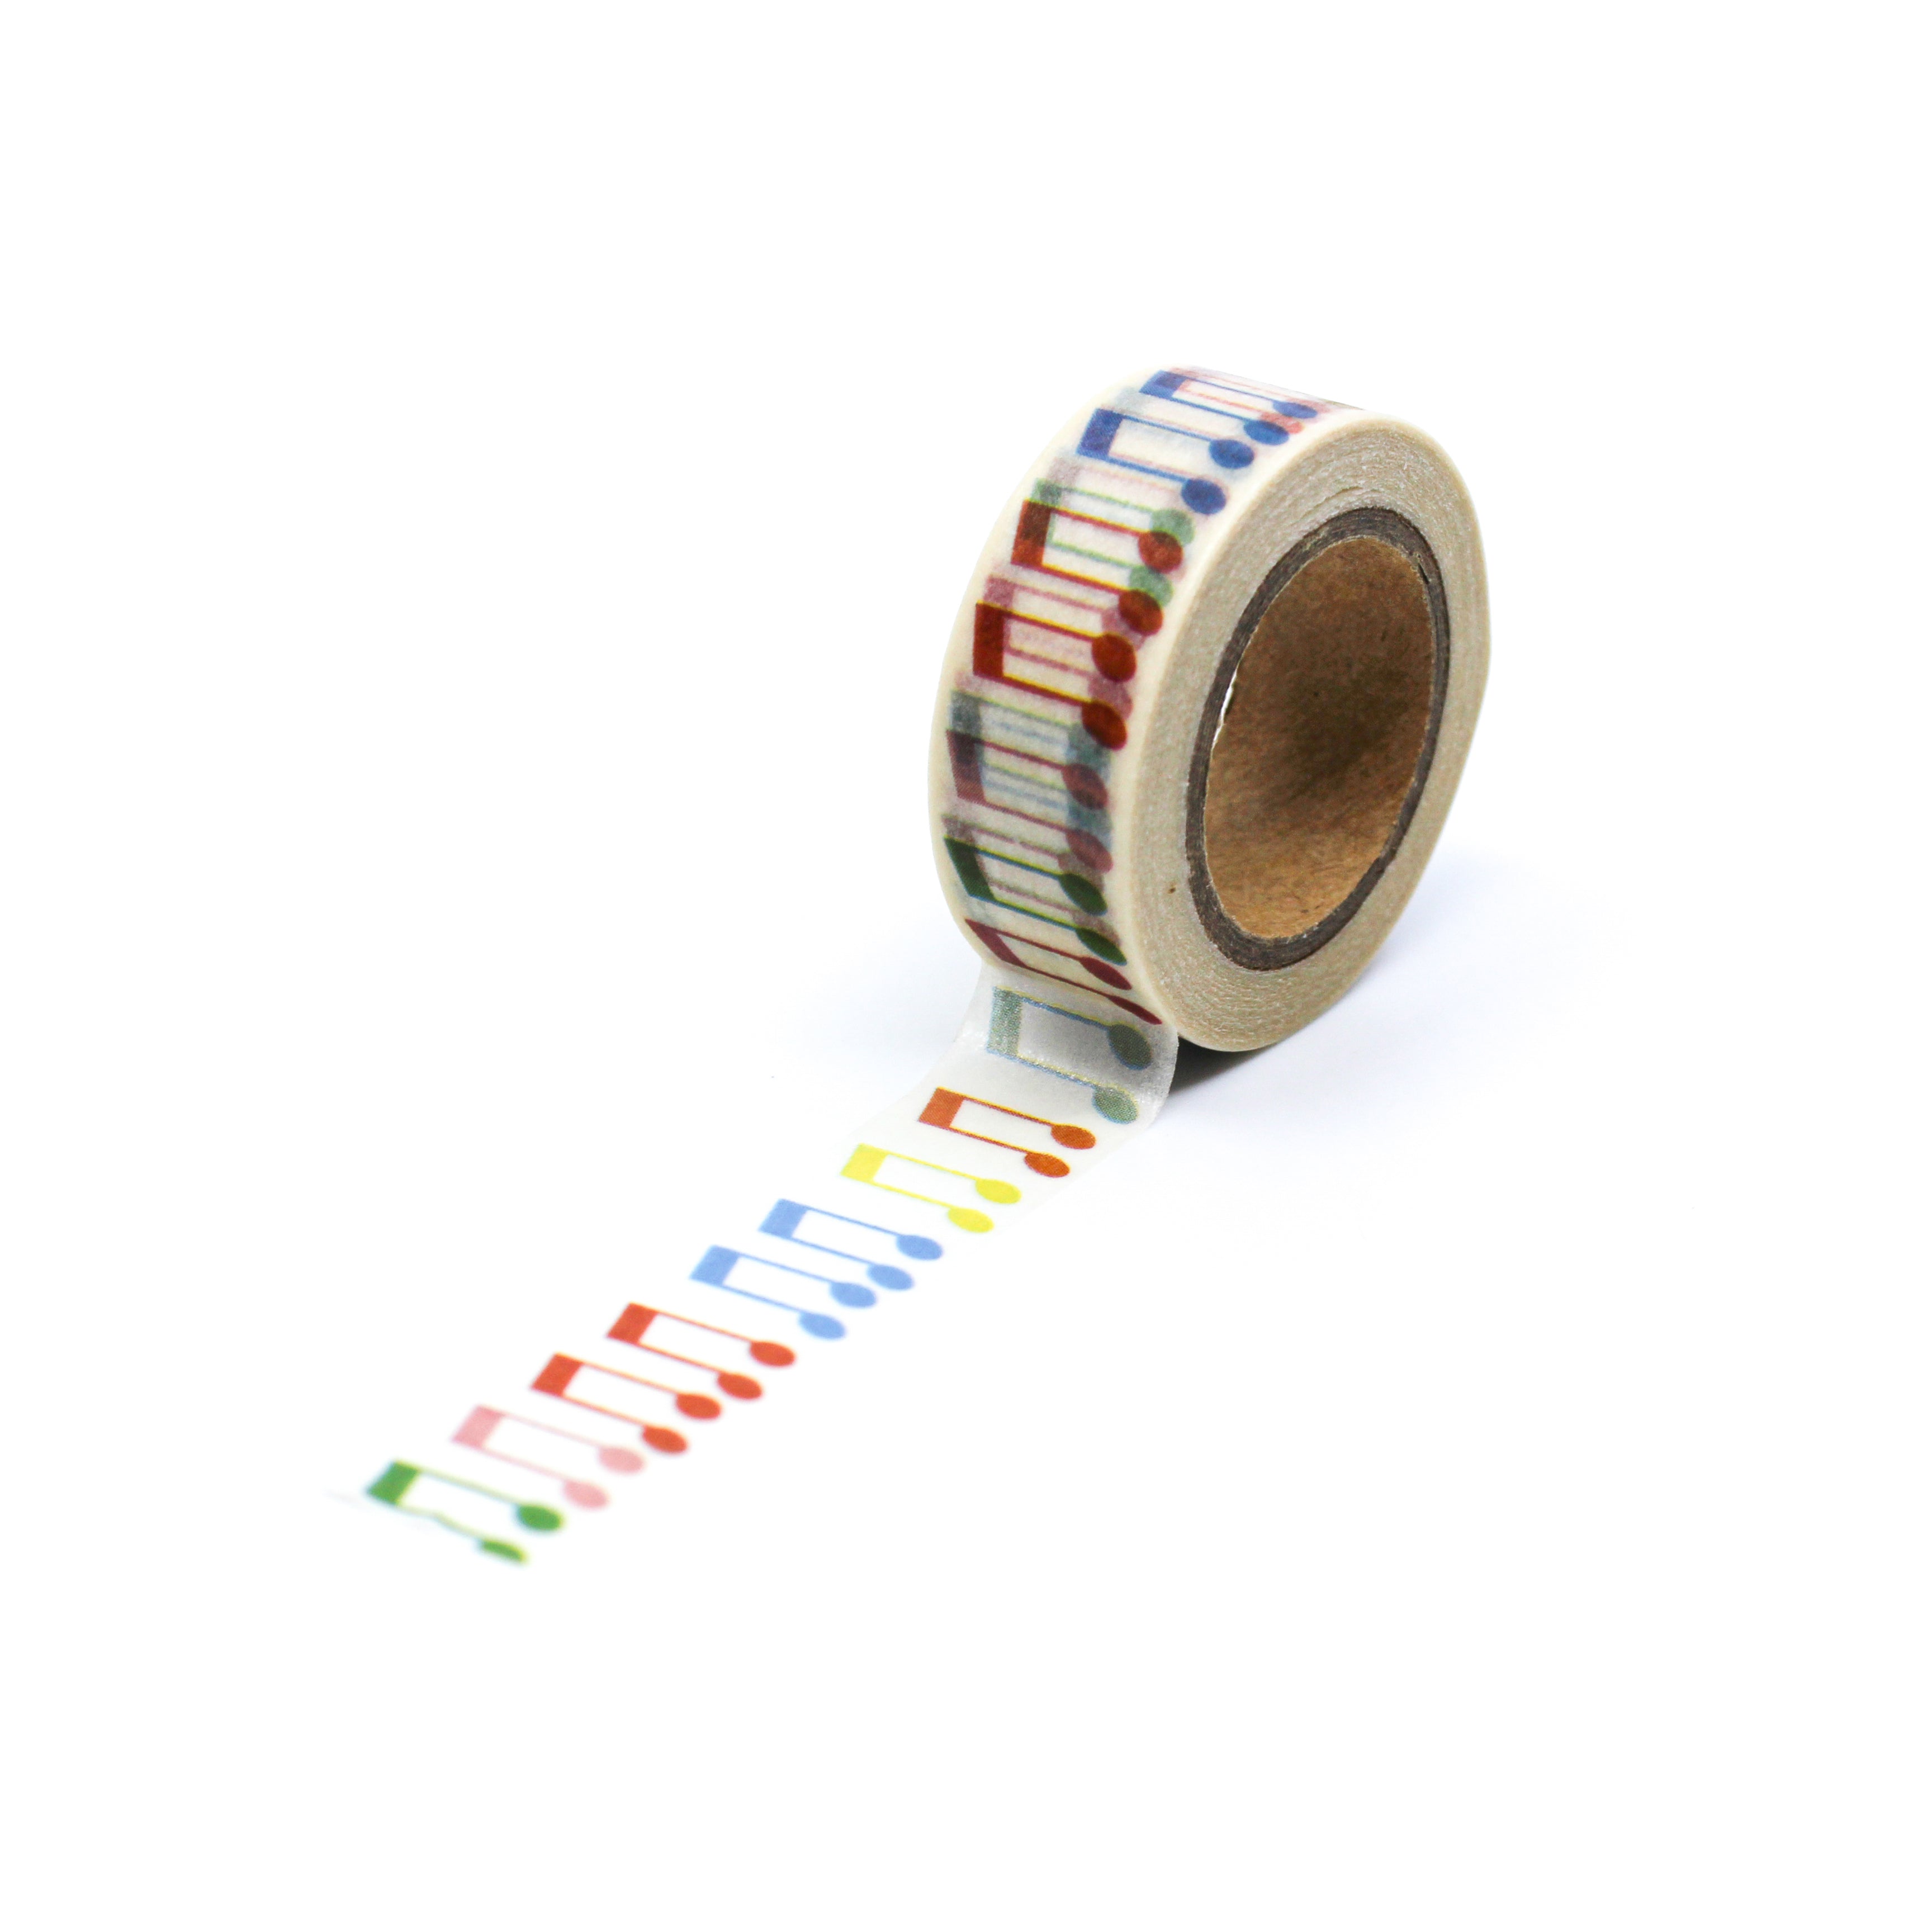 This is a full pattern review view of double eight notes washi tape from BBB Supplies Craft Shop